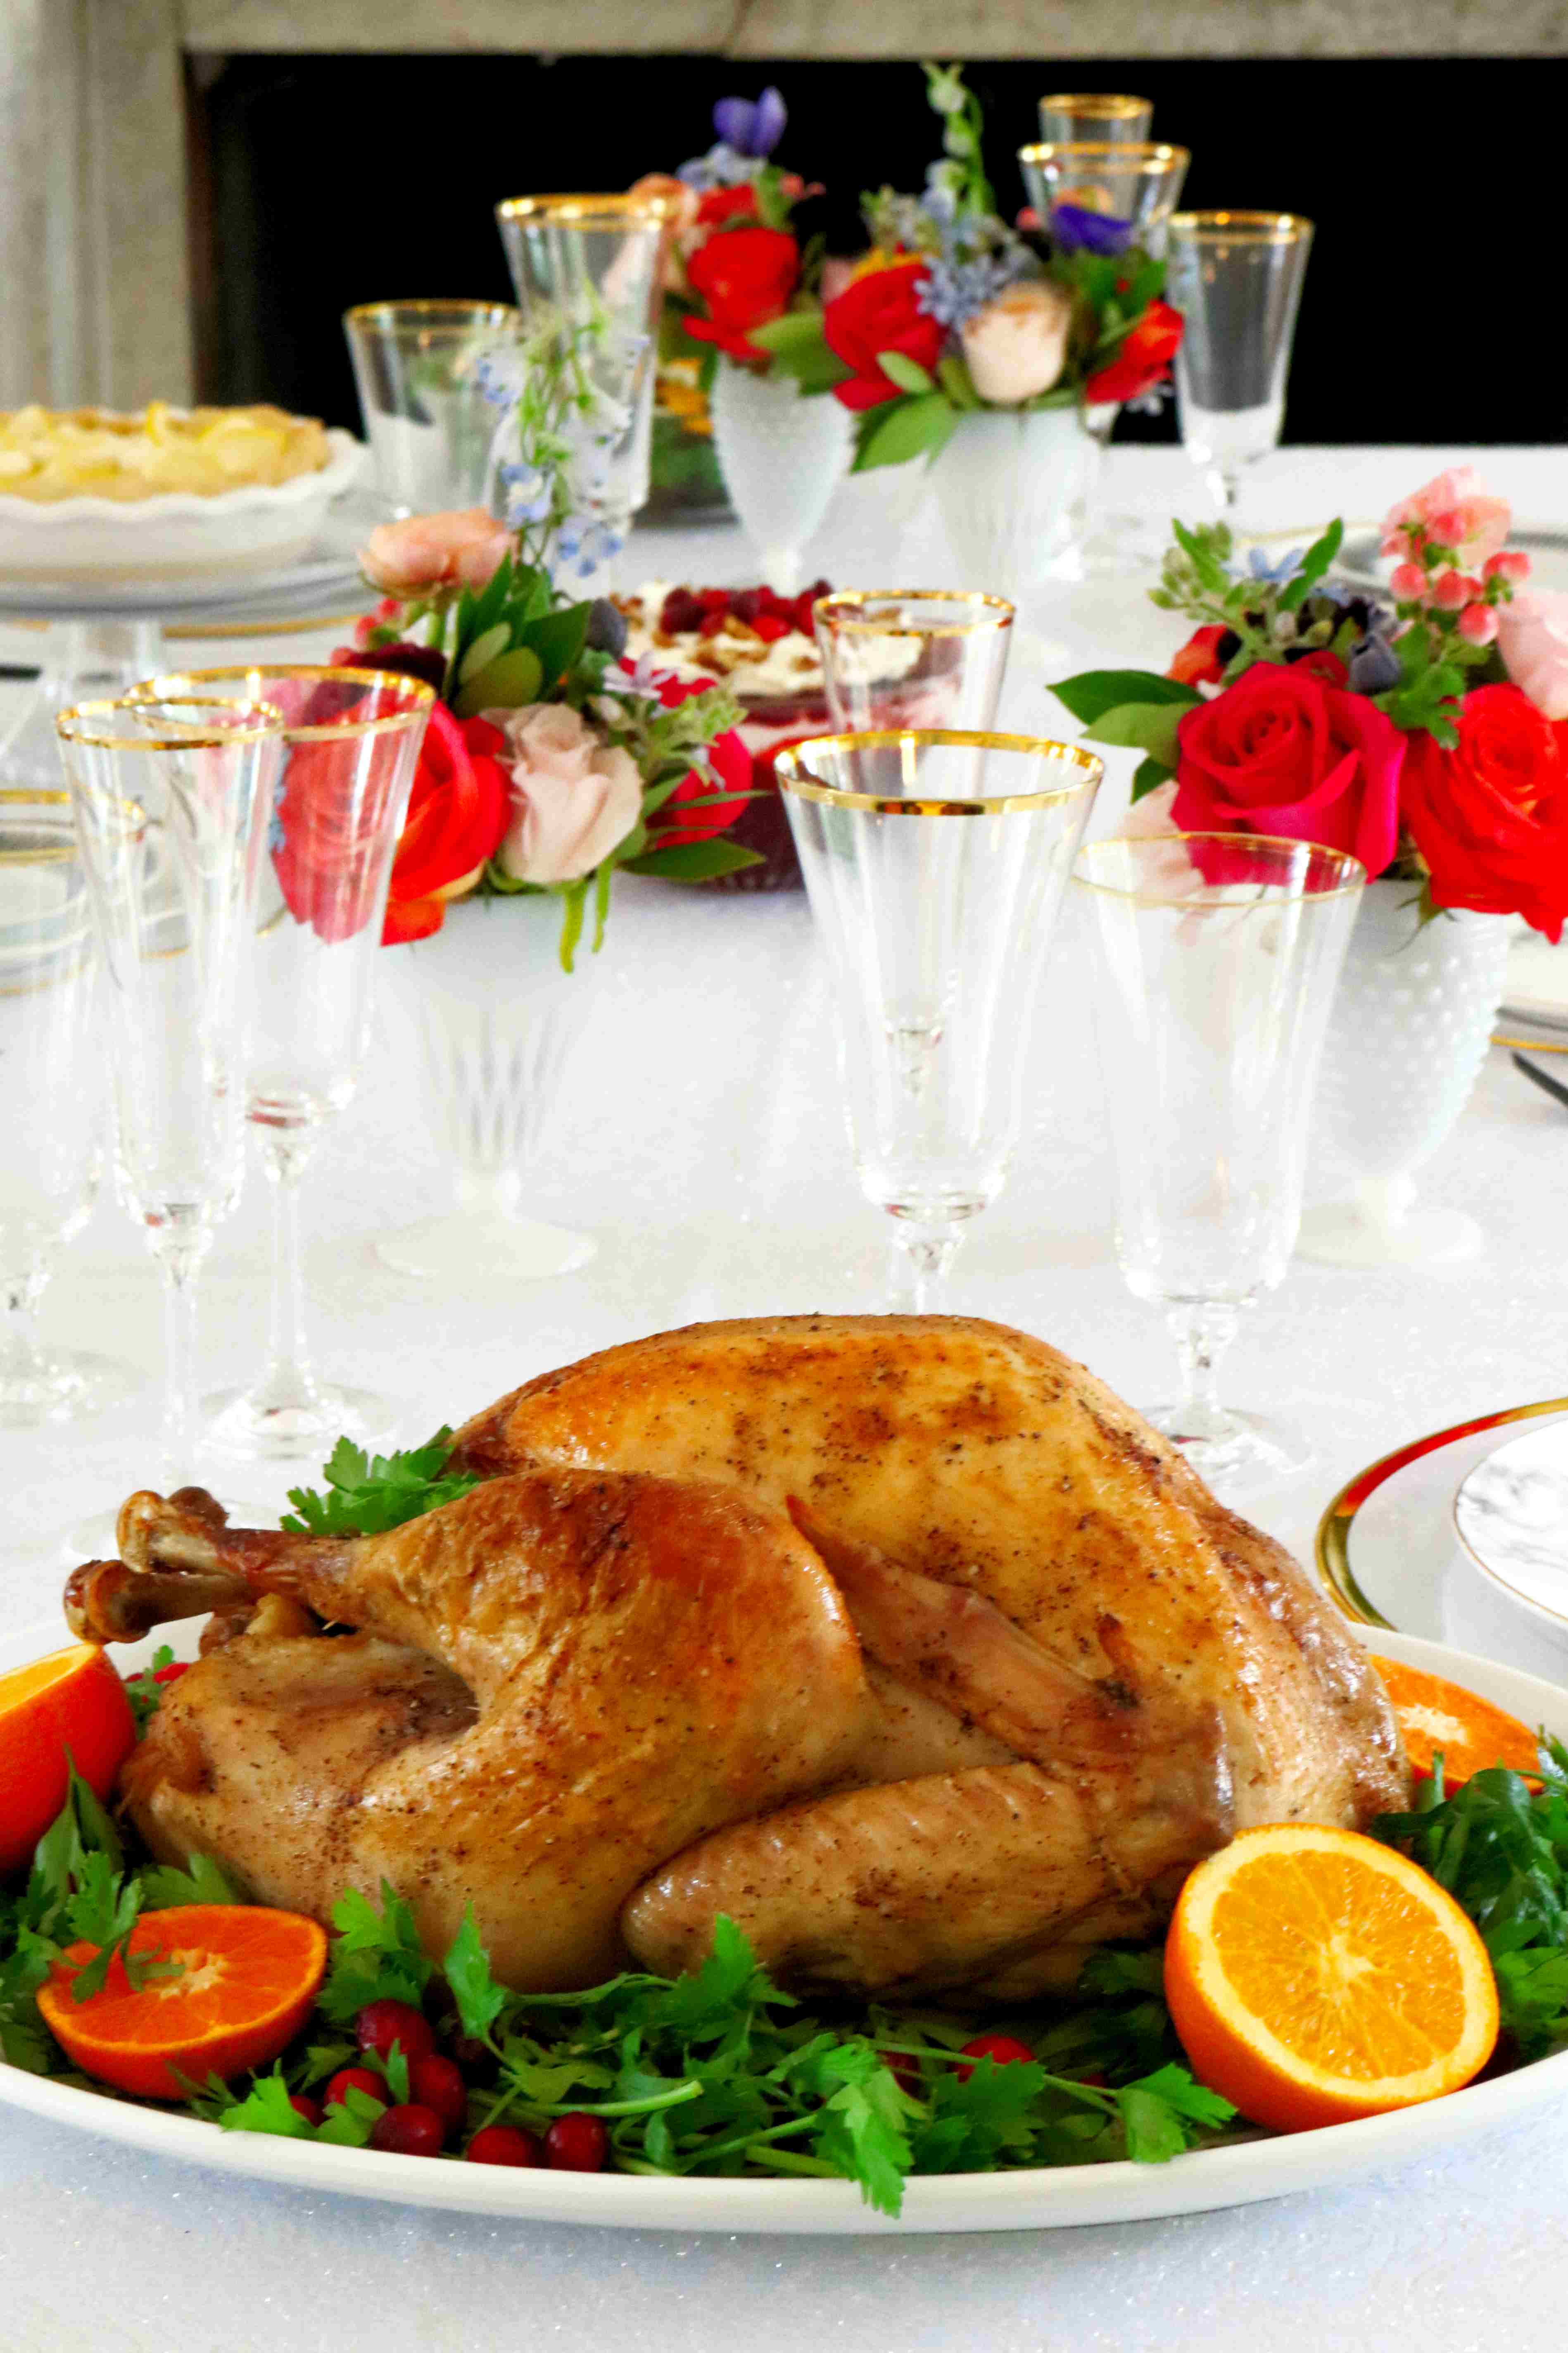 Whole roasted turkey on a platter with parsley and oranges around it. It is on a white tablecloth with flowers in the background.